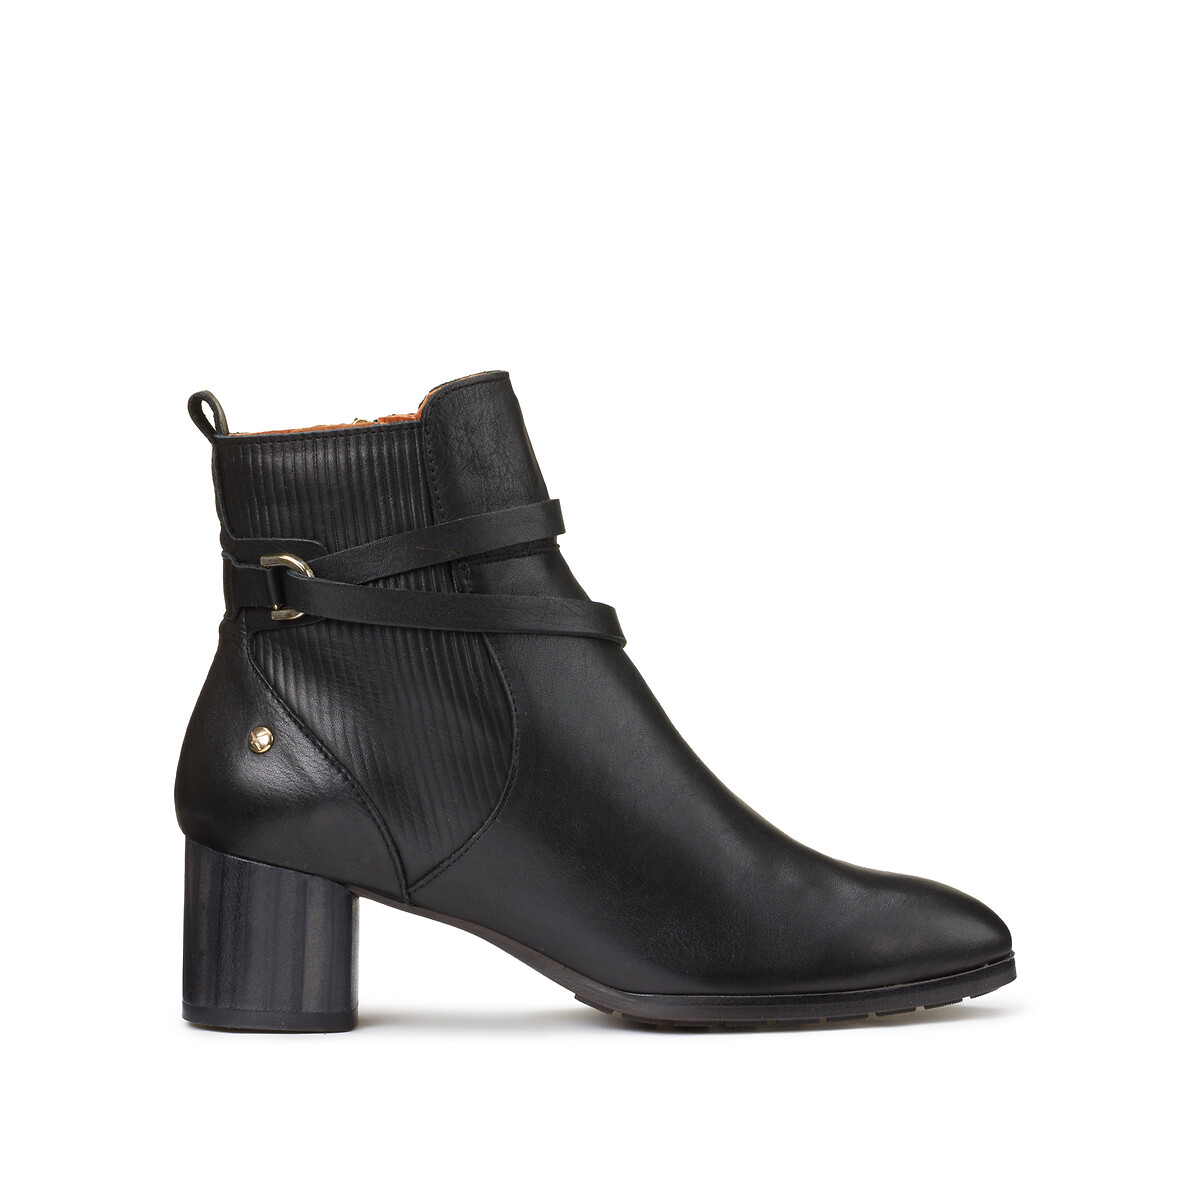 Calafat leather ankle boots, black, Pikolinos | La Redoute